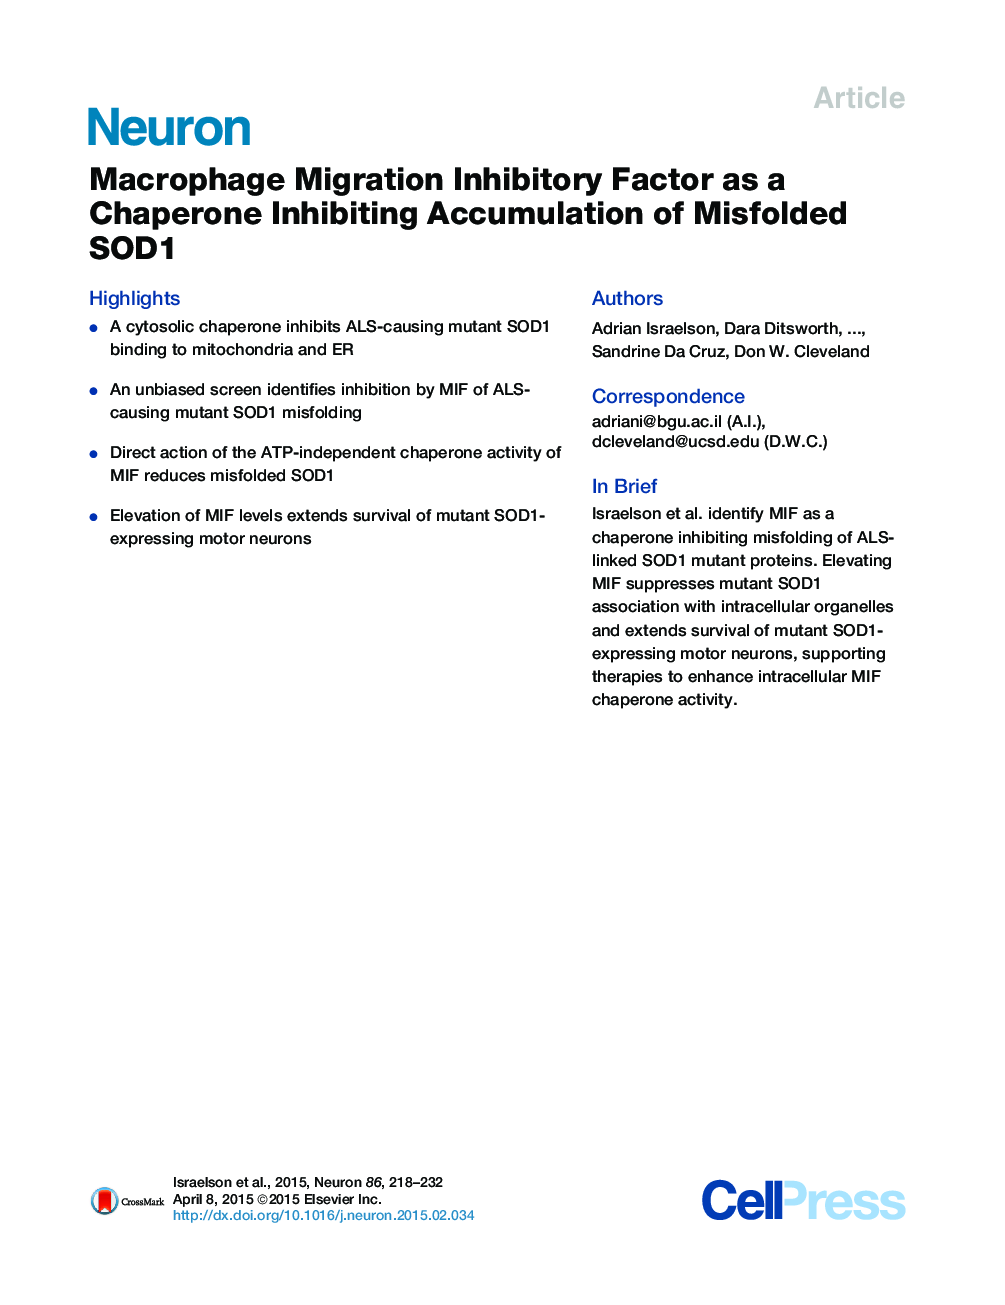 Macrophage Migration Inhibitory Factor as a Chaperone Inhibiting Accumulation of Misfolded SOD1